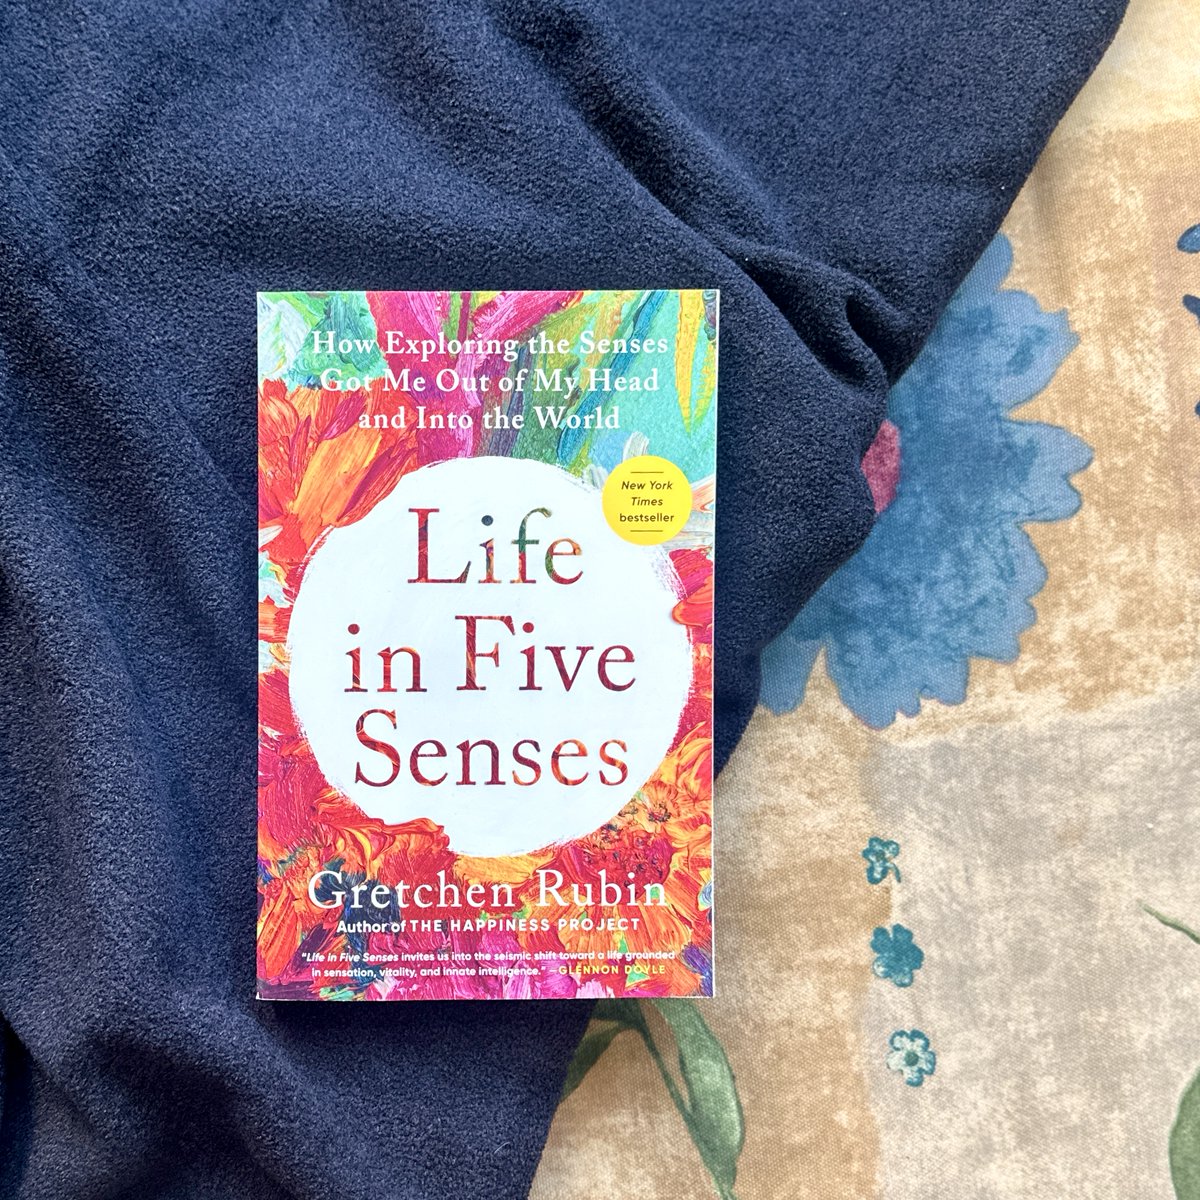 “LIFE IN FIVE SENSES invites us into the seismic shift toward a life grounded in sensation, vitality, and innate intelligence.”—Glennon Doyle @gretchenrubin's LIFE IN FIVE SENSES is out in paperback tomorrow—learn more at the link. penguinrandomhouse.com/books/704874/l…